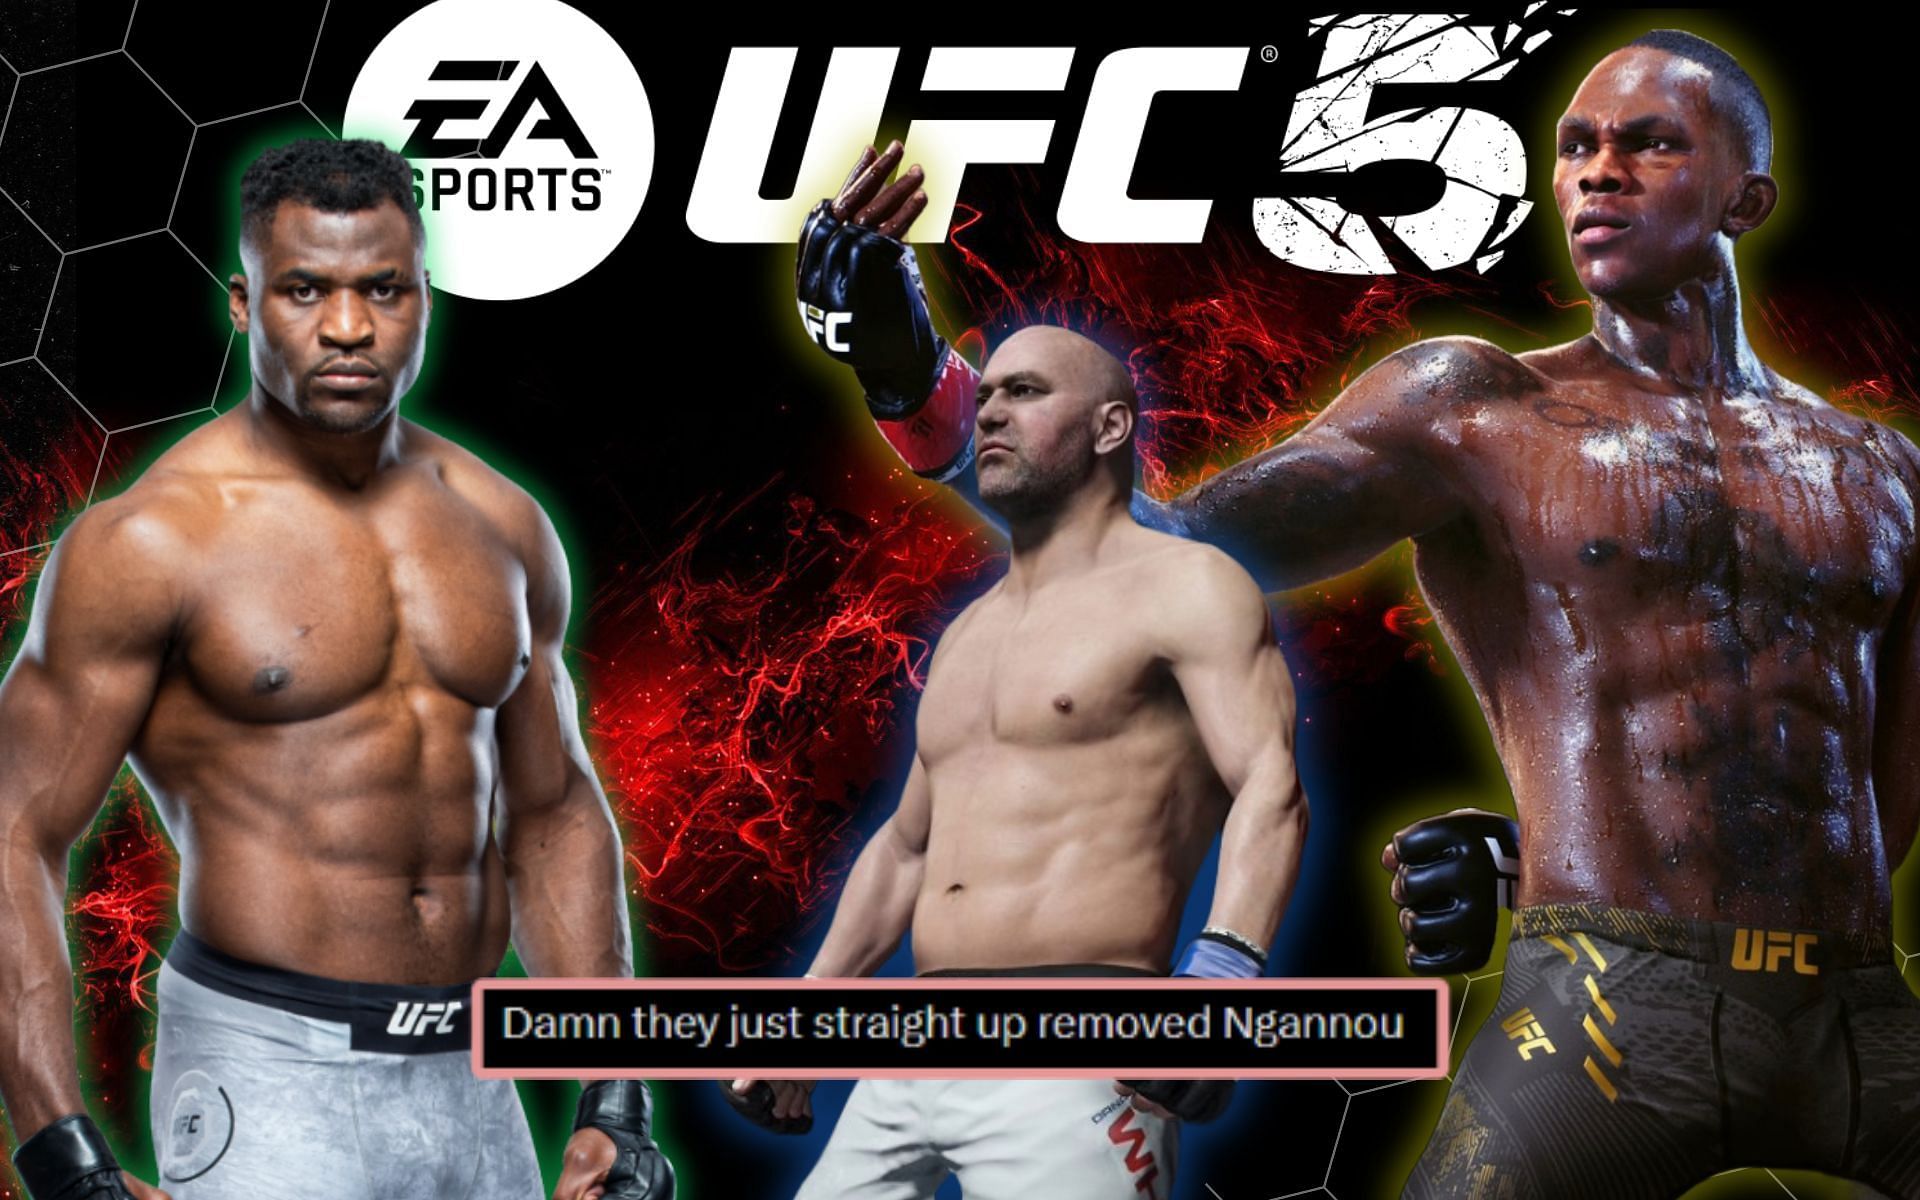 EA SPORTS UFC 5 Arrives October 27: Feel the Fight With Visceral